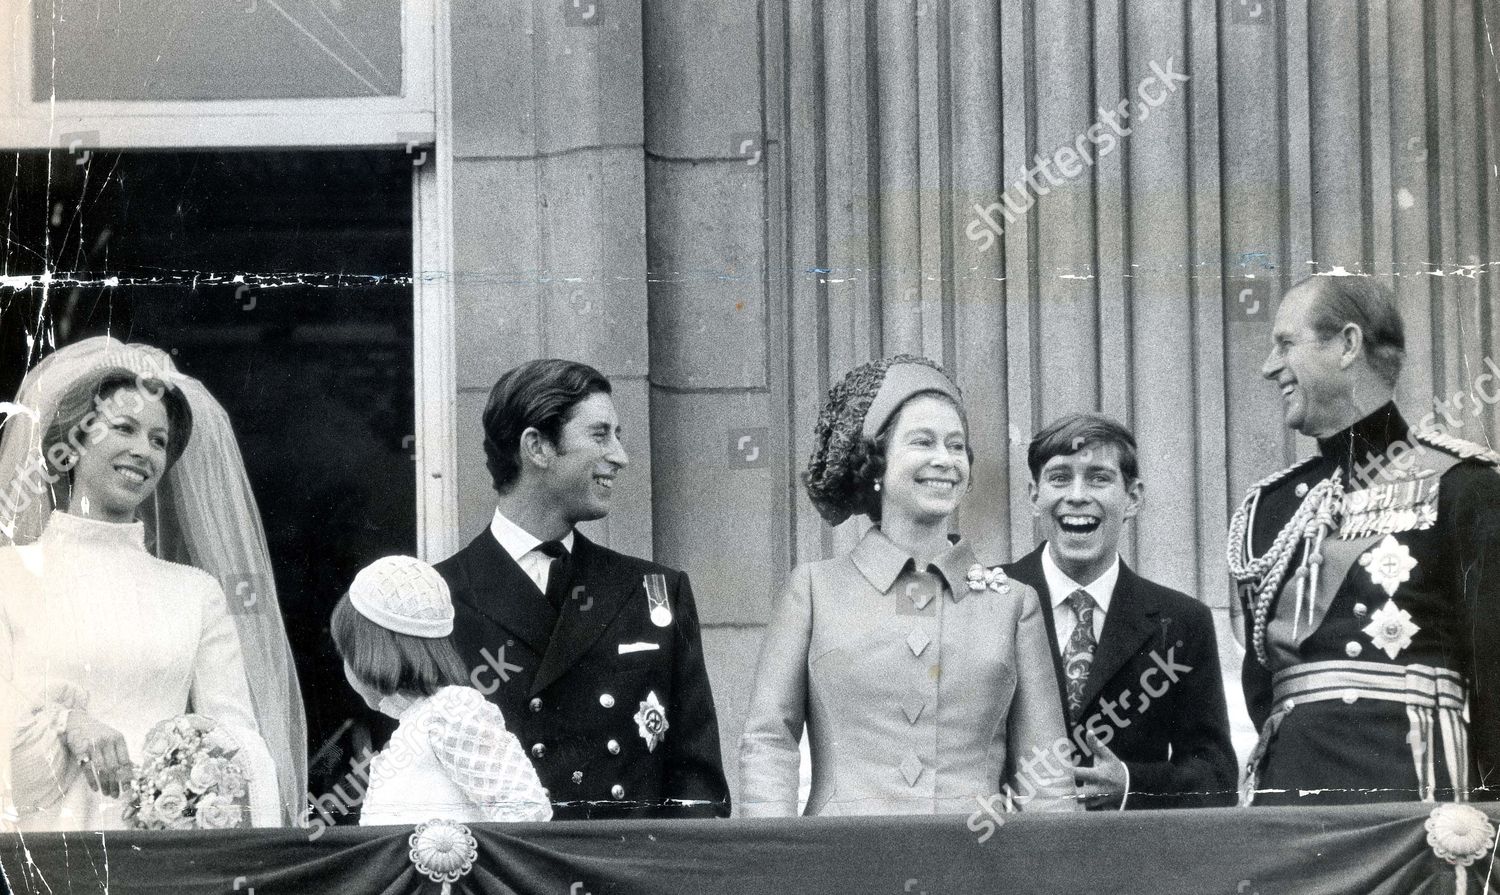 princess-anne-now-princess-royal-wedding-1973-picture-shows-princess-anne-and-capt-mark-phillips-in-buckingham-palace-with-members-of-their-families-after-their-wedding-l-to-r-lady-sarah-armstrong-jones-prince-charles-the-queen-prince-andrew-shutterstock-editorial-896332a.jpg